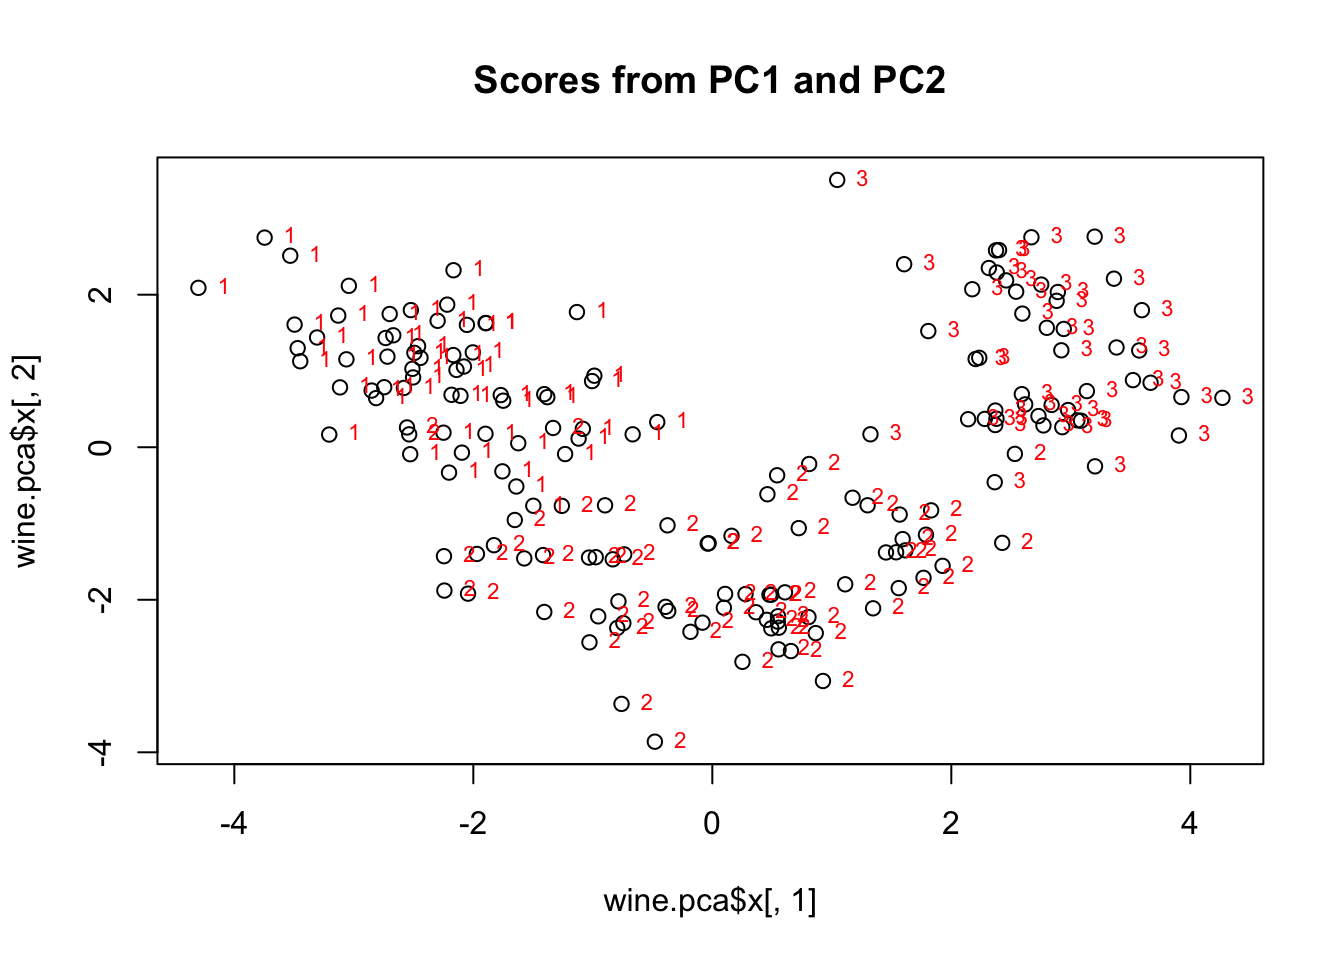 Scatterplot of principal component scores for standardized data of three wine cultivars (1, 2, 3). The first principal component scores are on the x axis, and the second principal component scores are on the y axis. Cultivar 1 is grouped in the upper left, with majority negative scores for principal component 1 and positive scores for principal component 2. Cultivar 2 is grouped with negative scores for principal component 2 and between -2 and 3 for principal component 1. Cultivar 3 is grouped in mostly positive scores for both components.